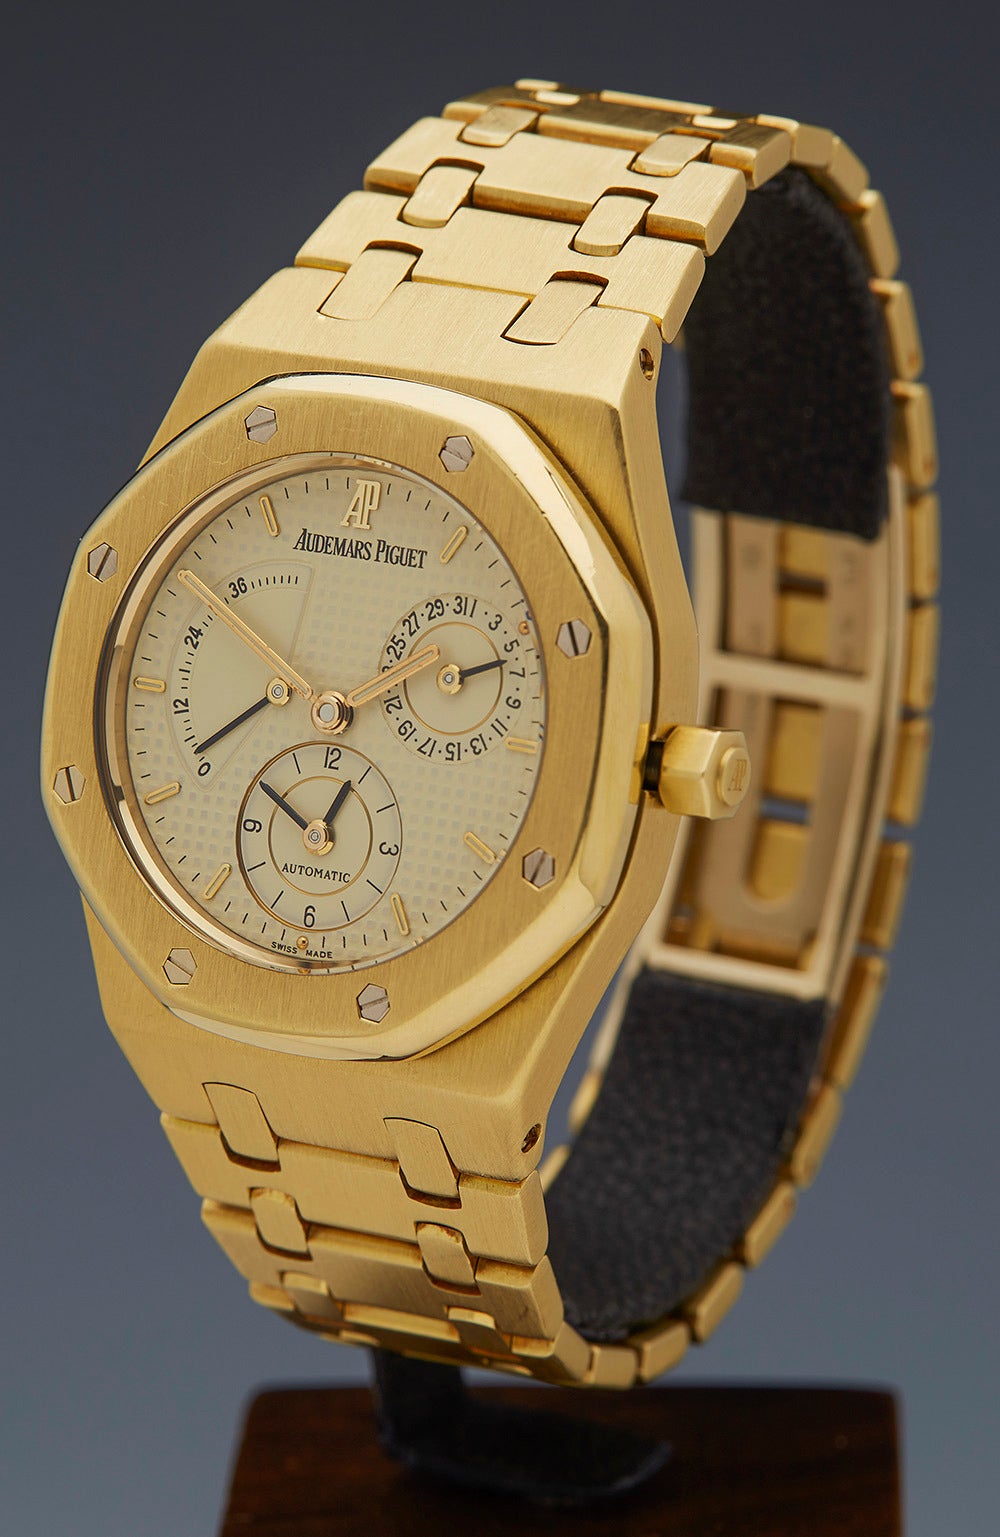 Specifications

Movement: Automatic
Case: 18k Yellow Gold
Case Diameter: 36mm
Dial: Silvered
Bracelet: 18k Yellow Gold
Strap Length: Adjustable up to 17.5cm
Strap Width: At case - 20mm. At Buckle - 16mm
Buckle: 18k Deployment
Glass: